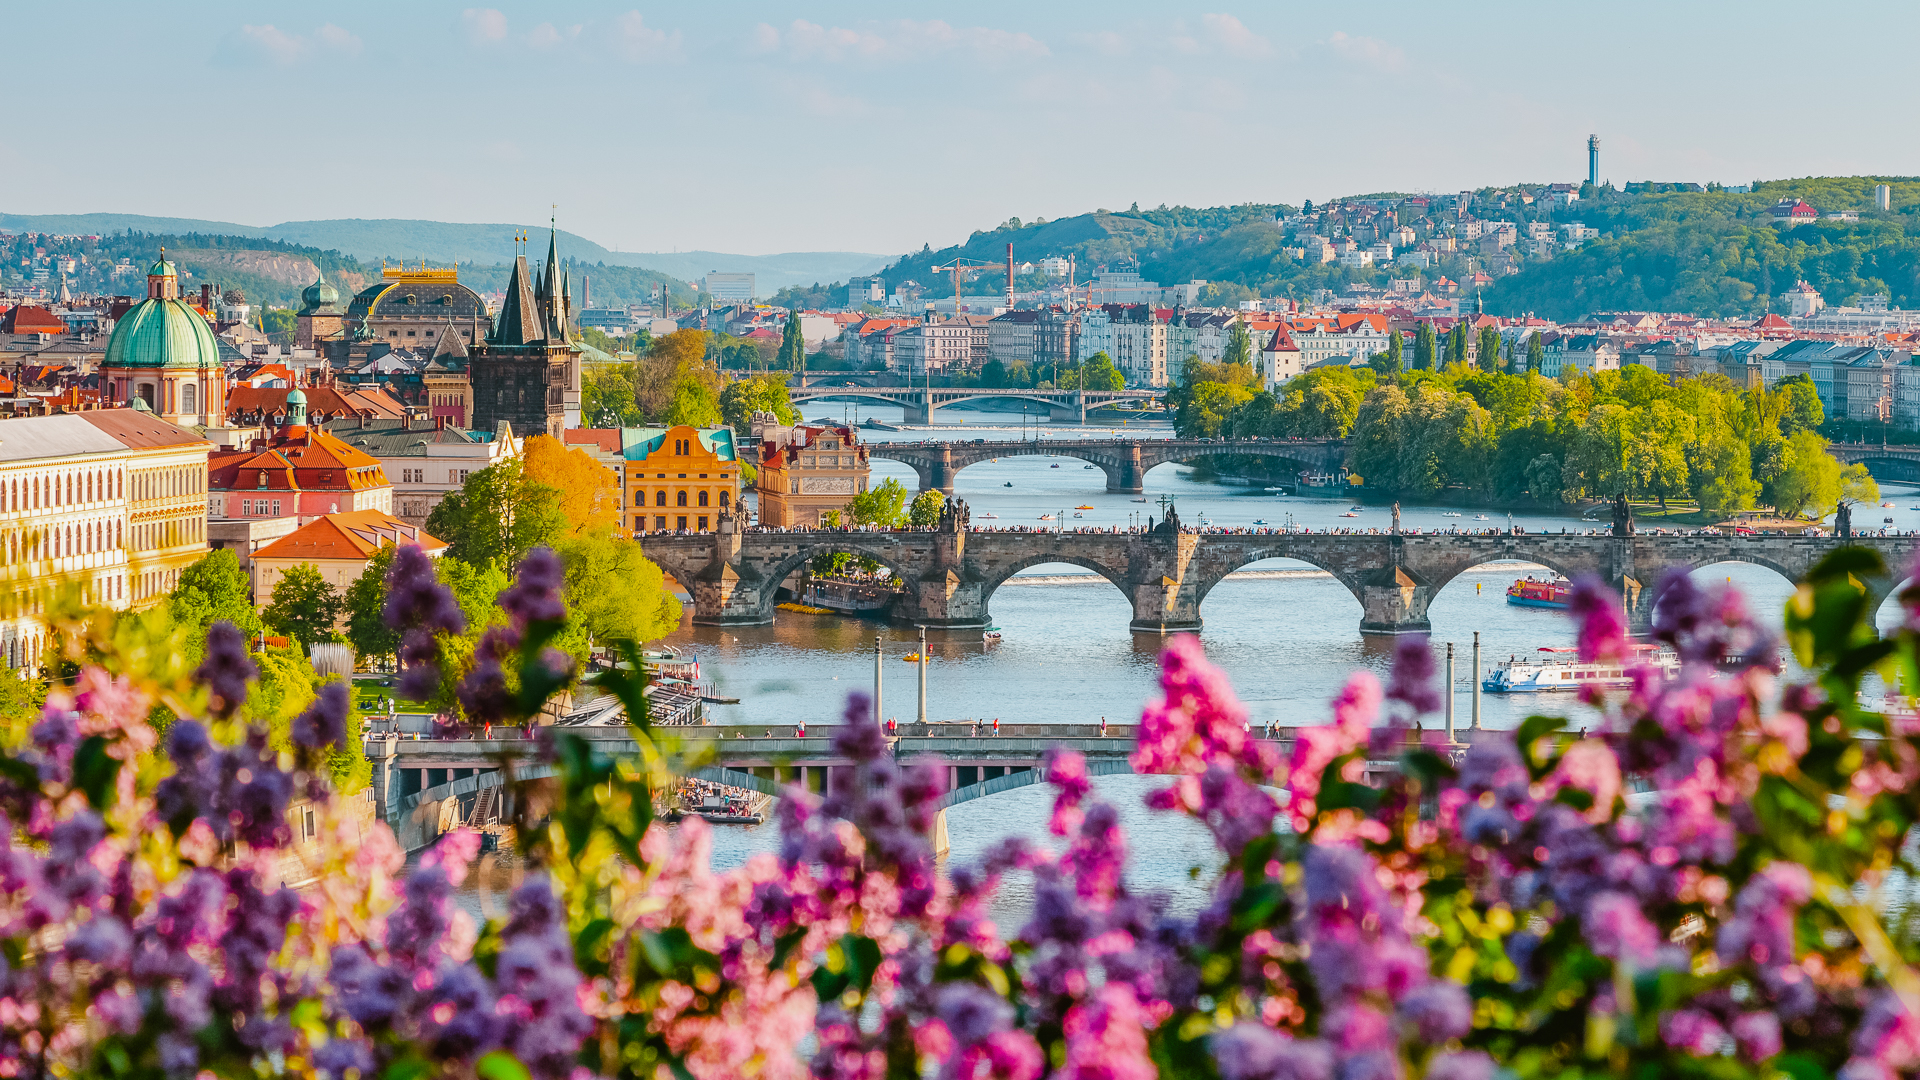 Panorama of Prague with the famous Charles bridge and adjacent buildings seen through a bush of pink blossoms.